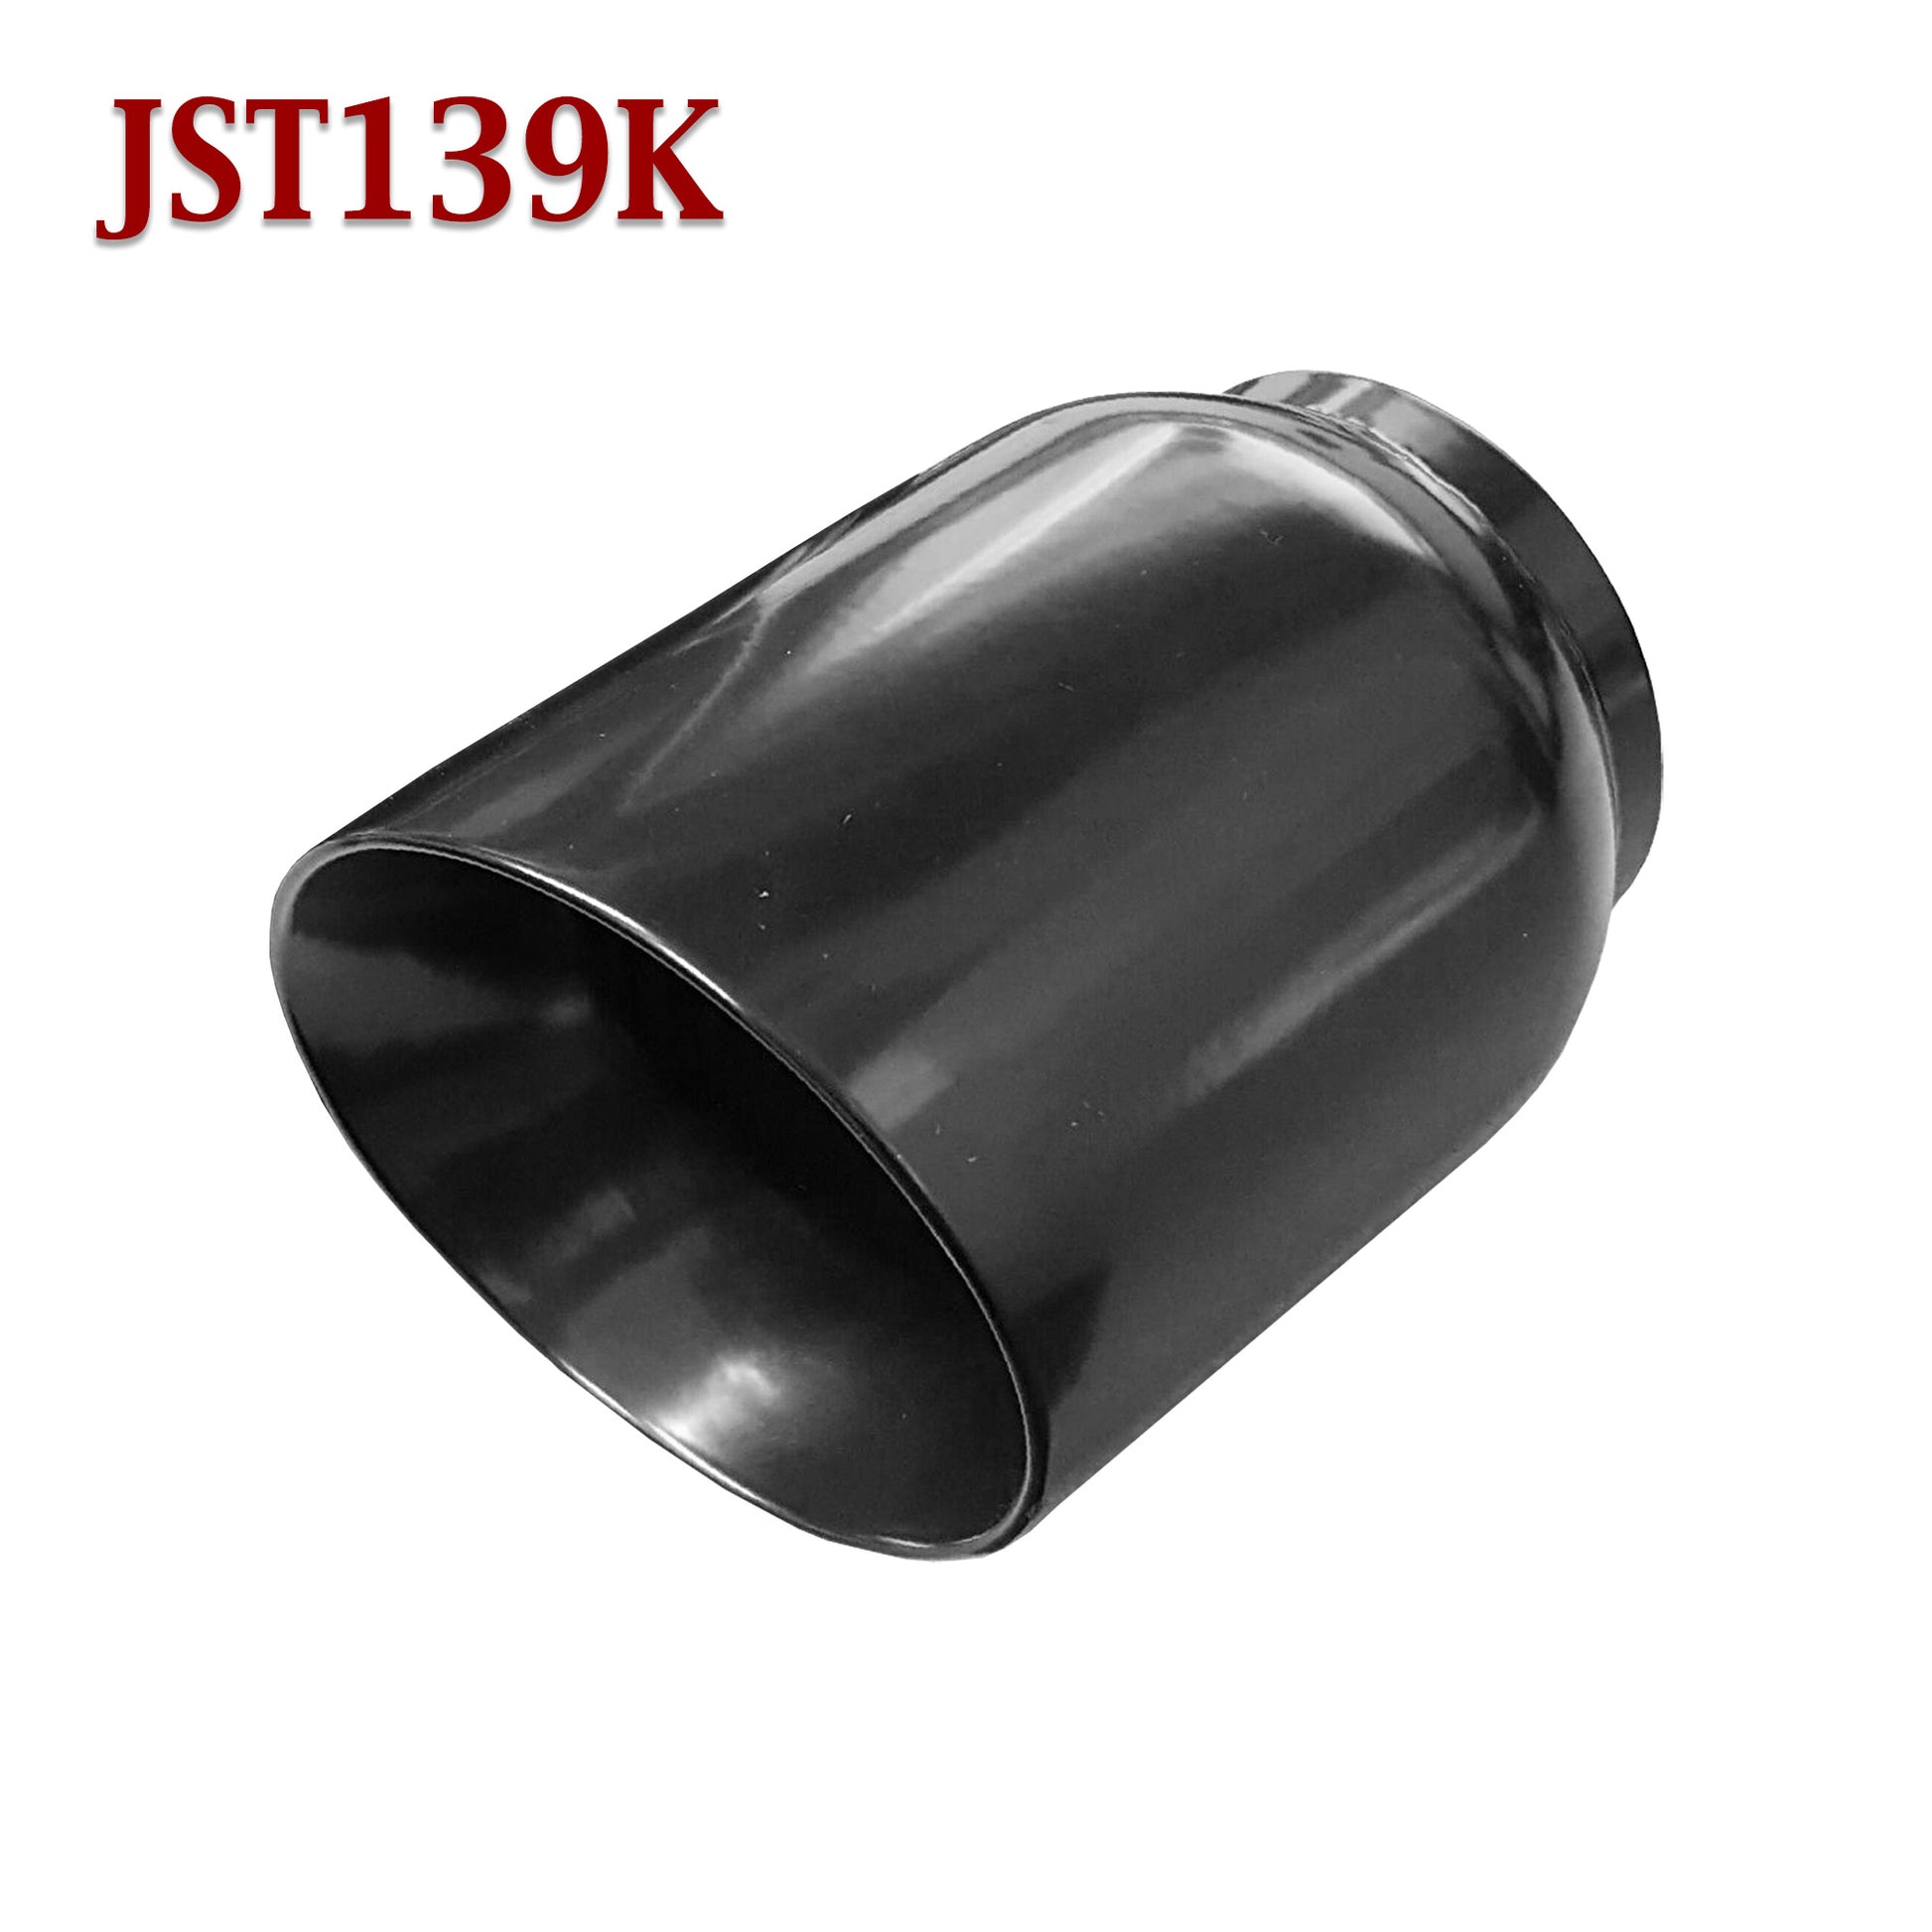 JST139 2.5 Stainless Round Exhaust Tip 2 1/2 Inlet / 4 Outlet / 5 Long Single (One)